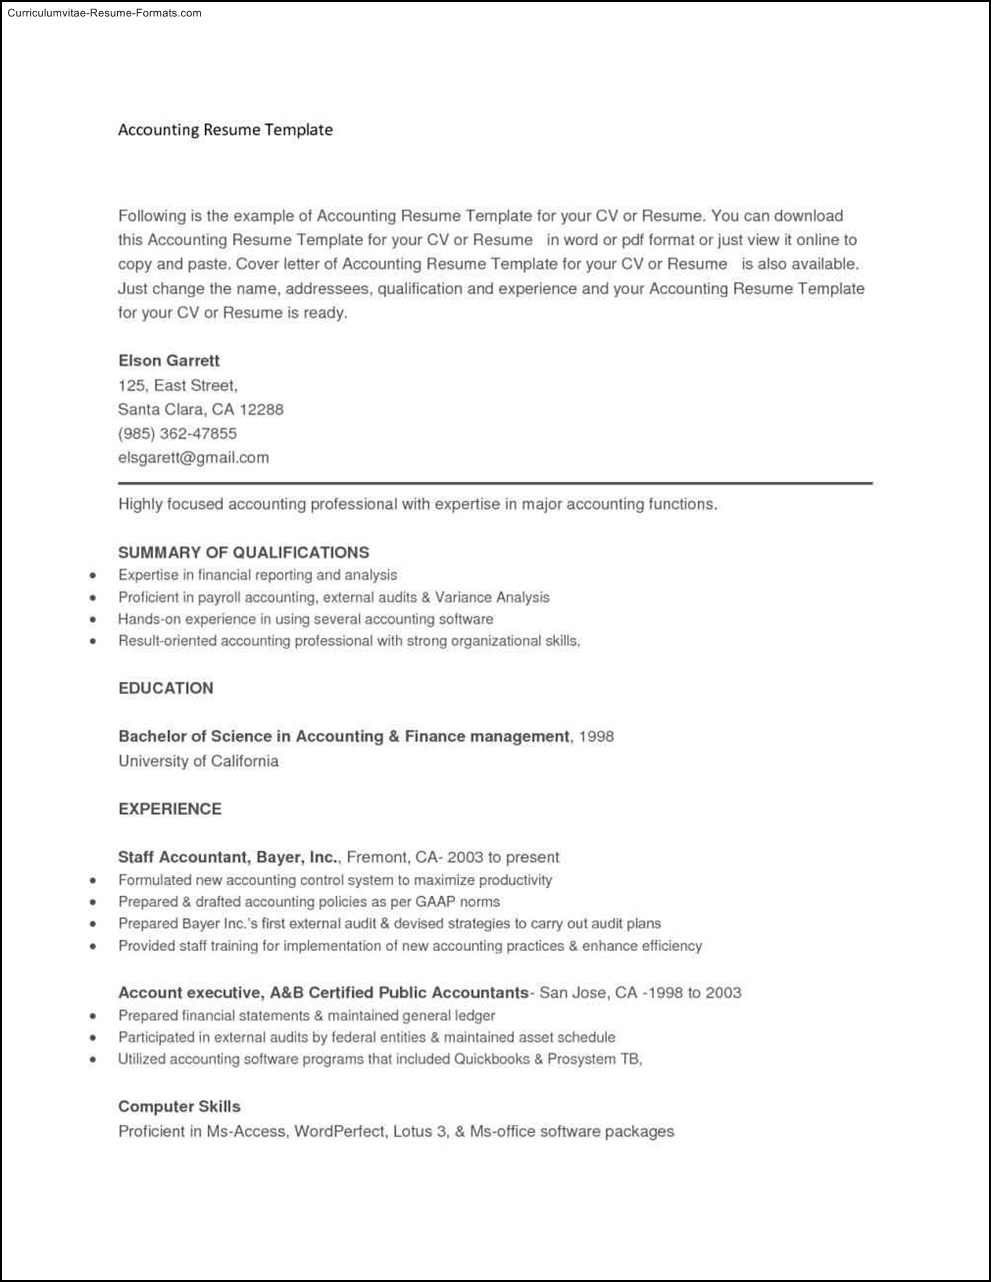 copy-and-paste-resume-templates-free-samples-examples-format-resume-curruculum-vitae